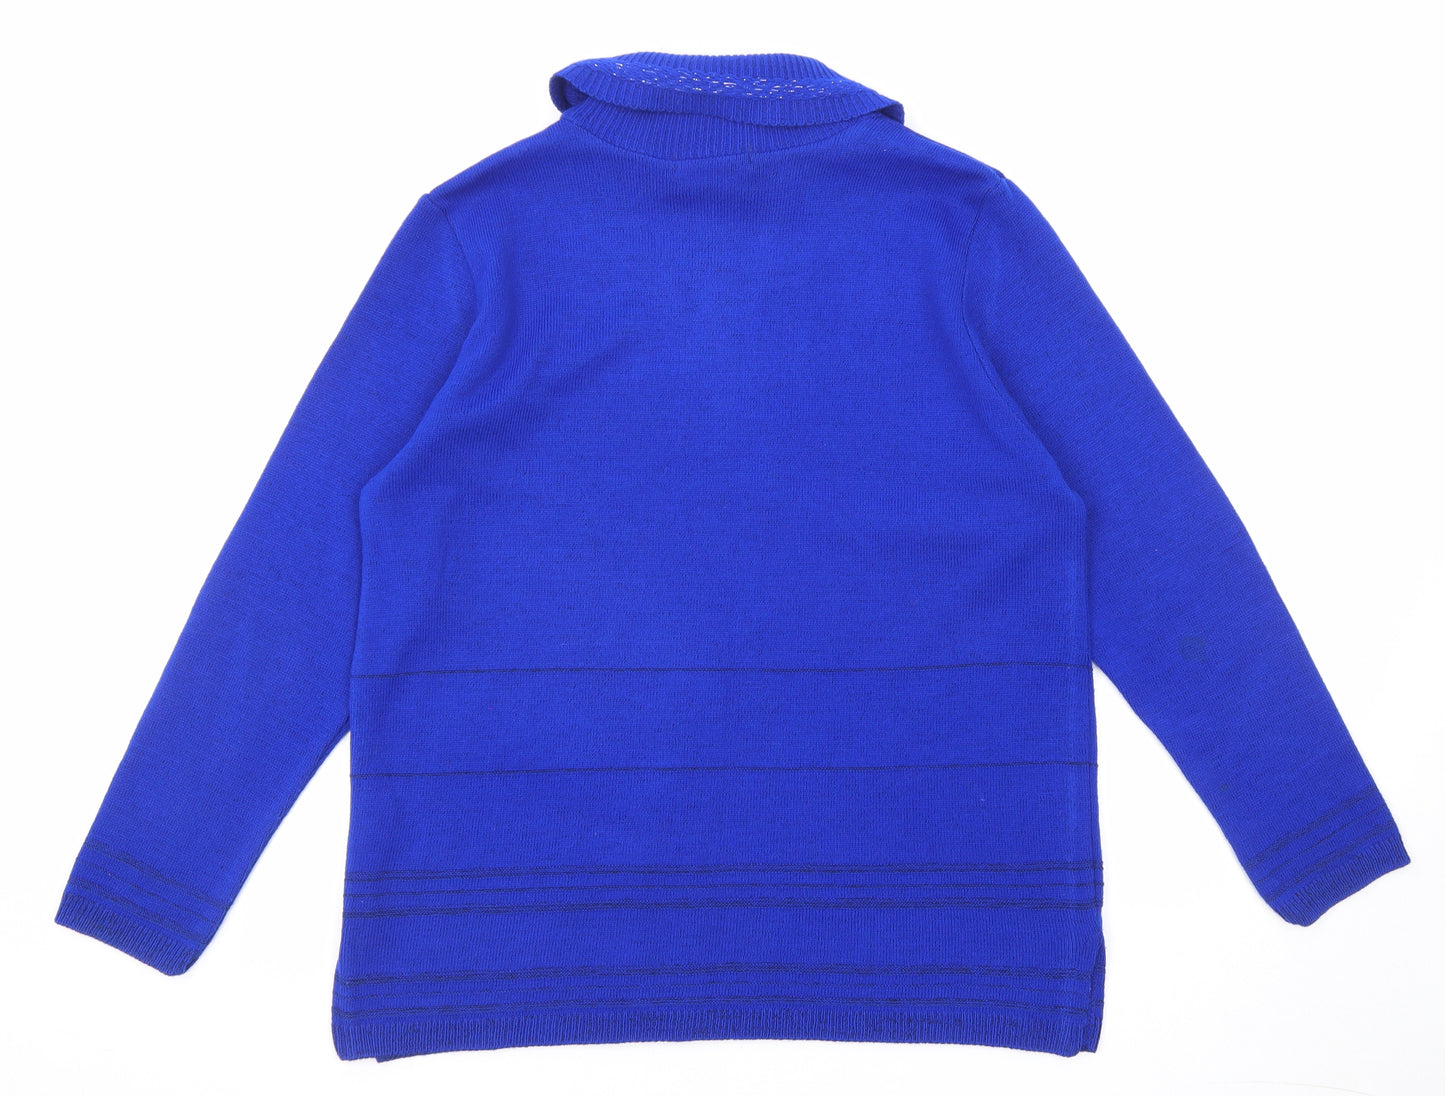 Envy Womens Blue Roll Neck Acrylic Pullover Jumper Size M - Size M-L